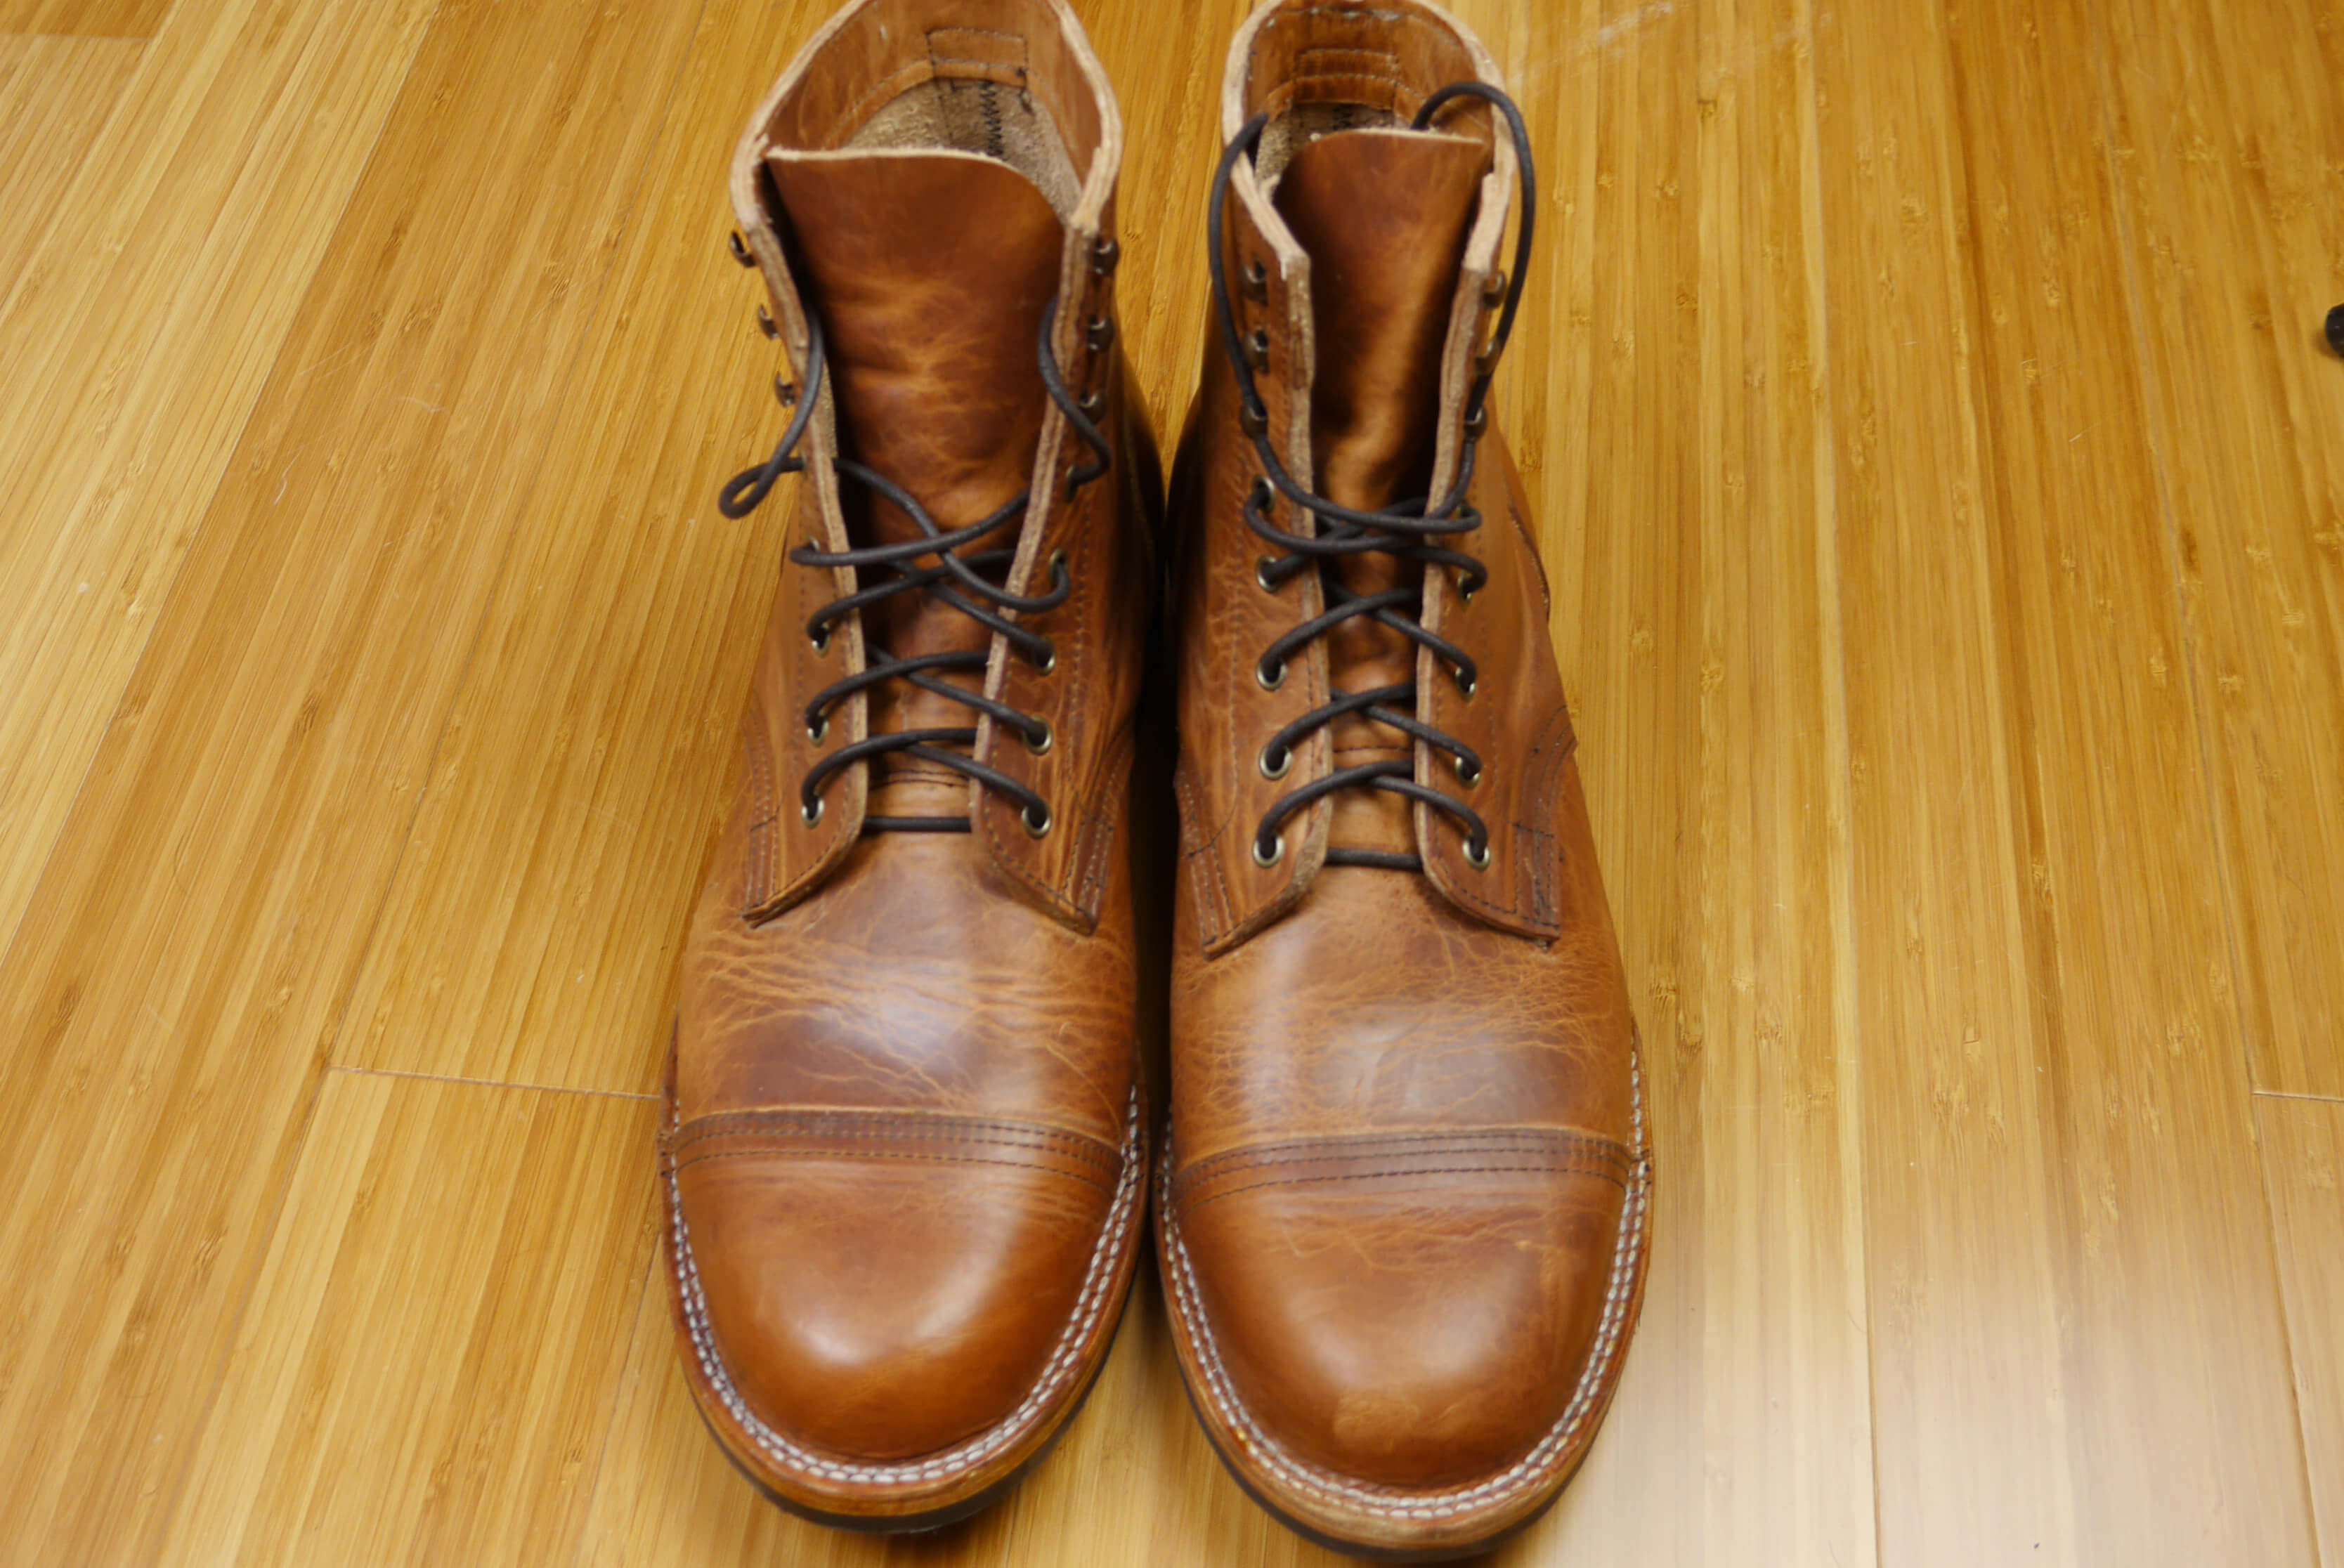 Reviewing the Truman Boot Co. Horween Dublin - Rope Dye Crafted Goods